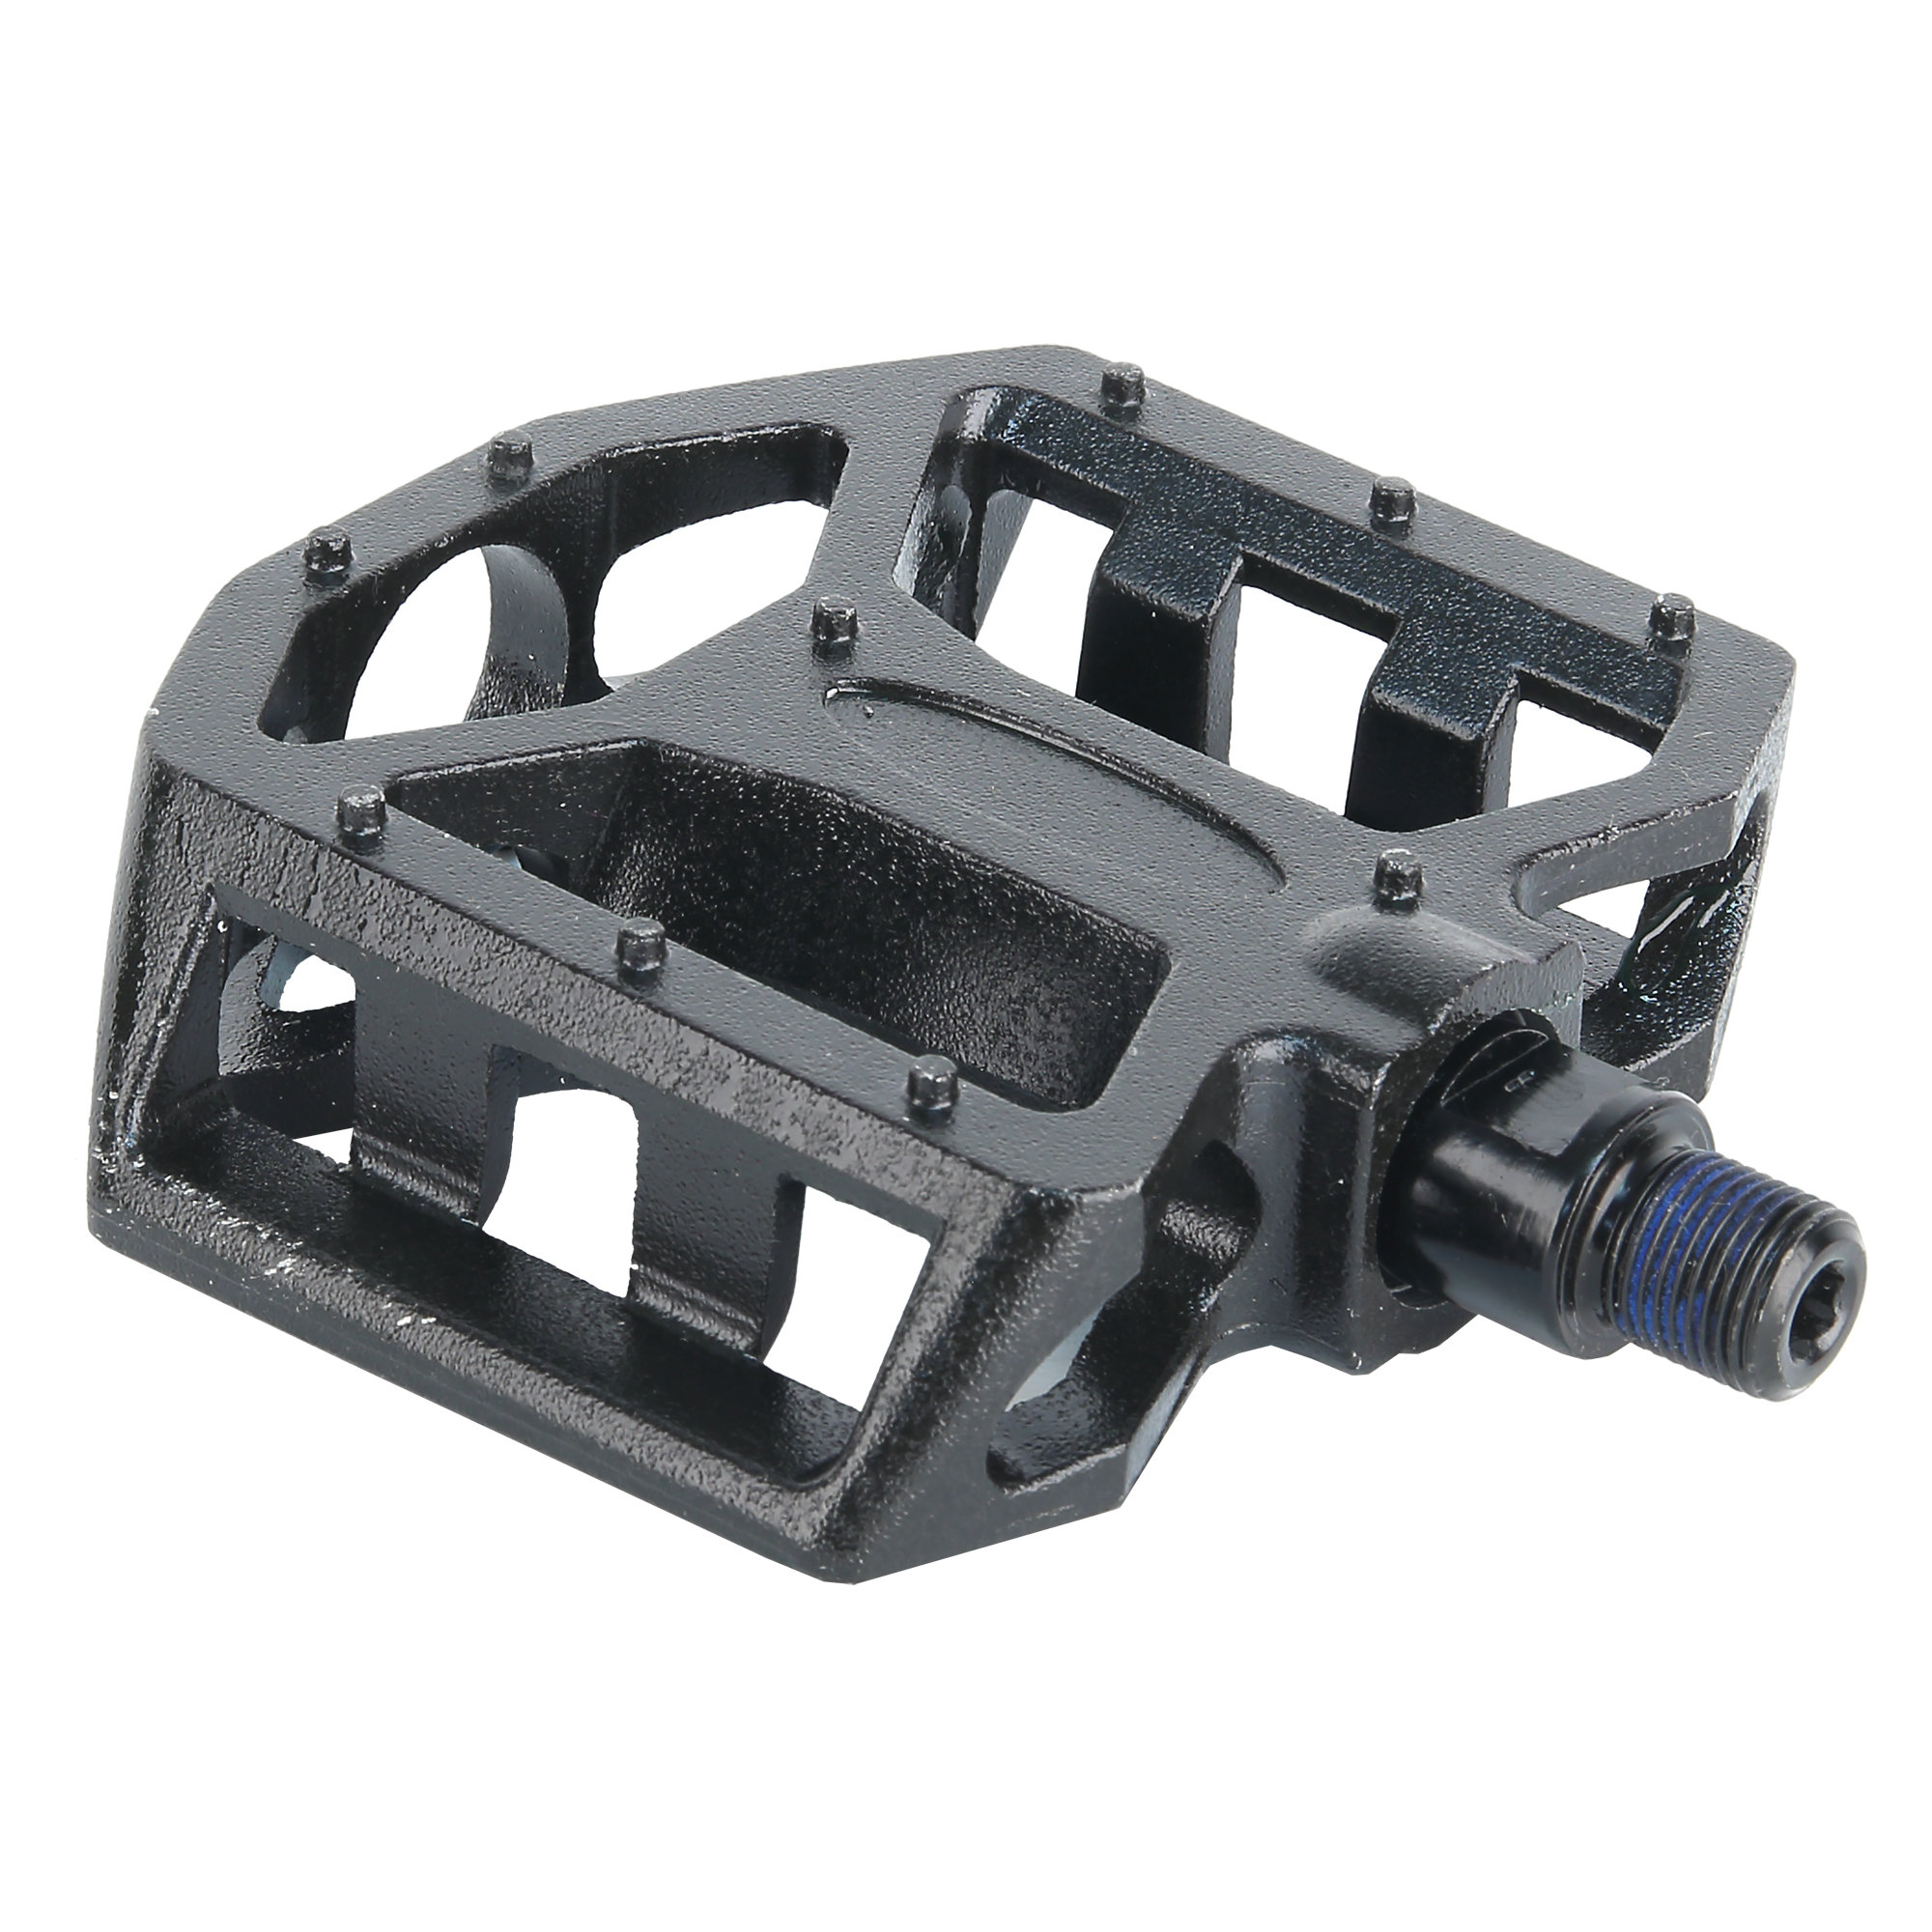 Right Pedal without Toe Clip for the Assault Air Bike, 9/16"